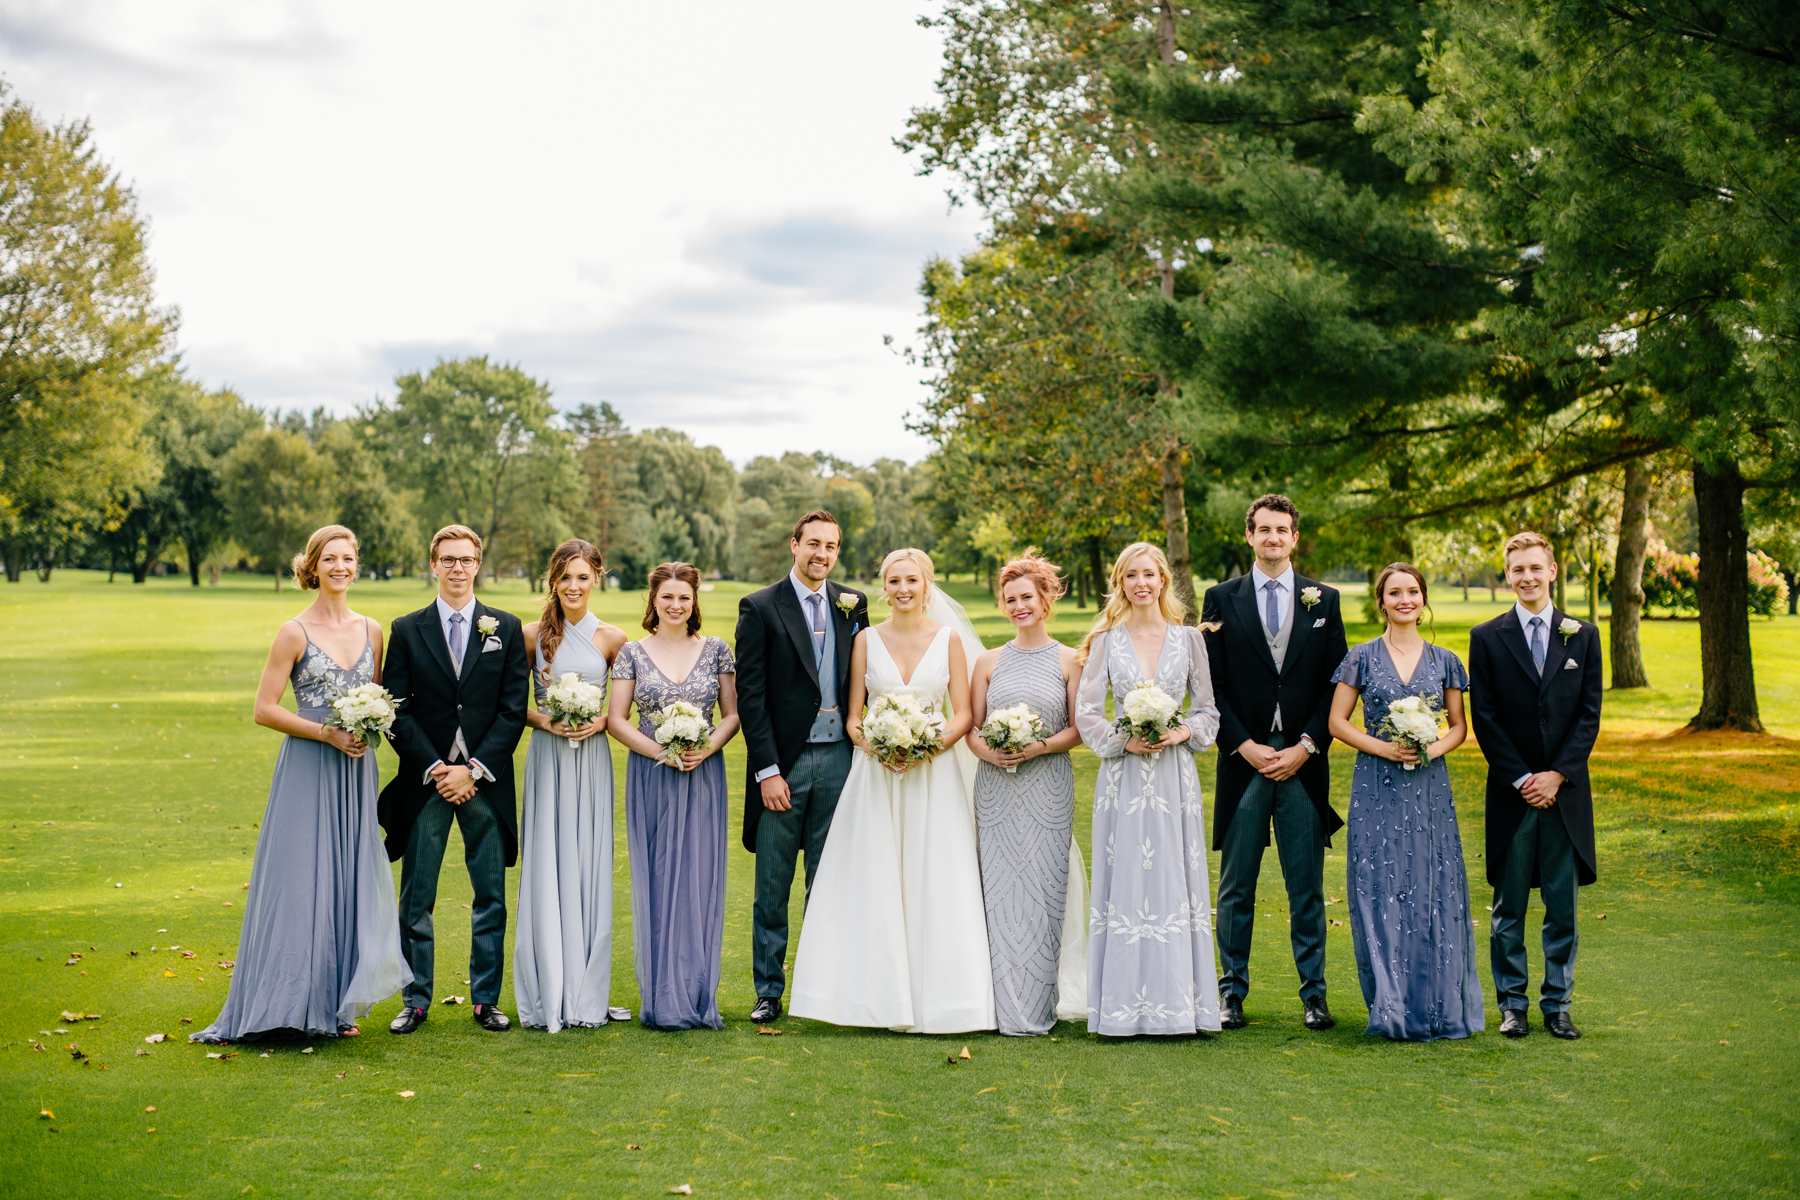 Bridal Party Portraits at the Saginaw Country Club